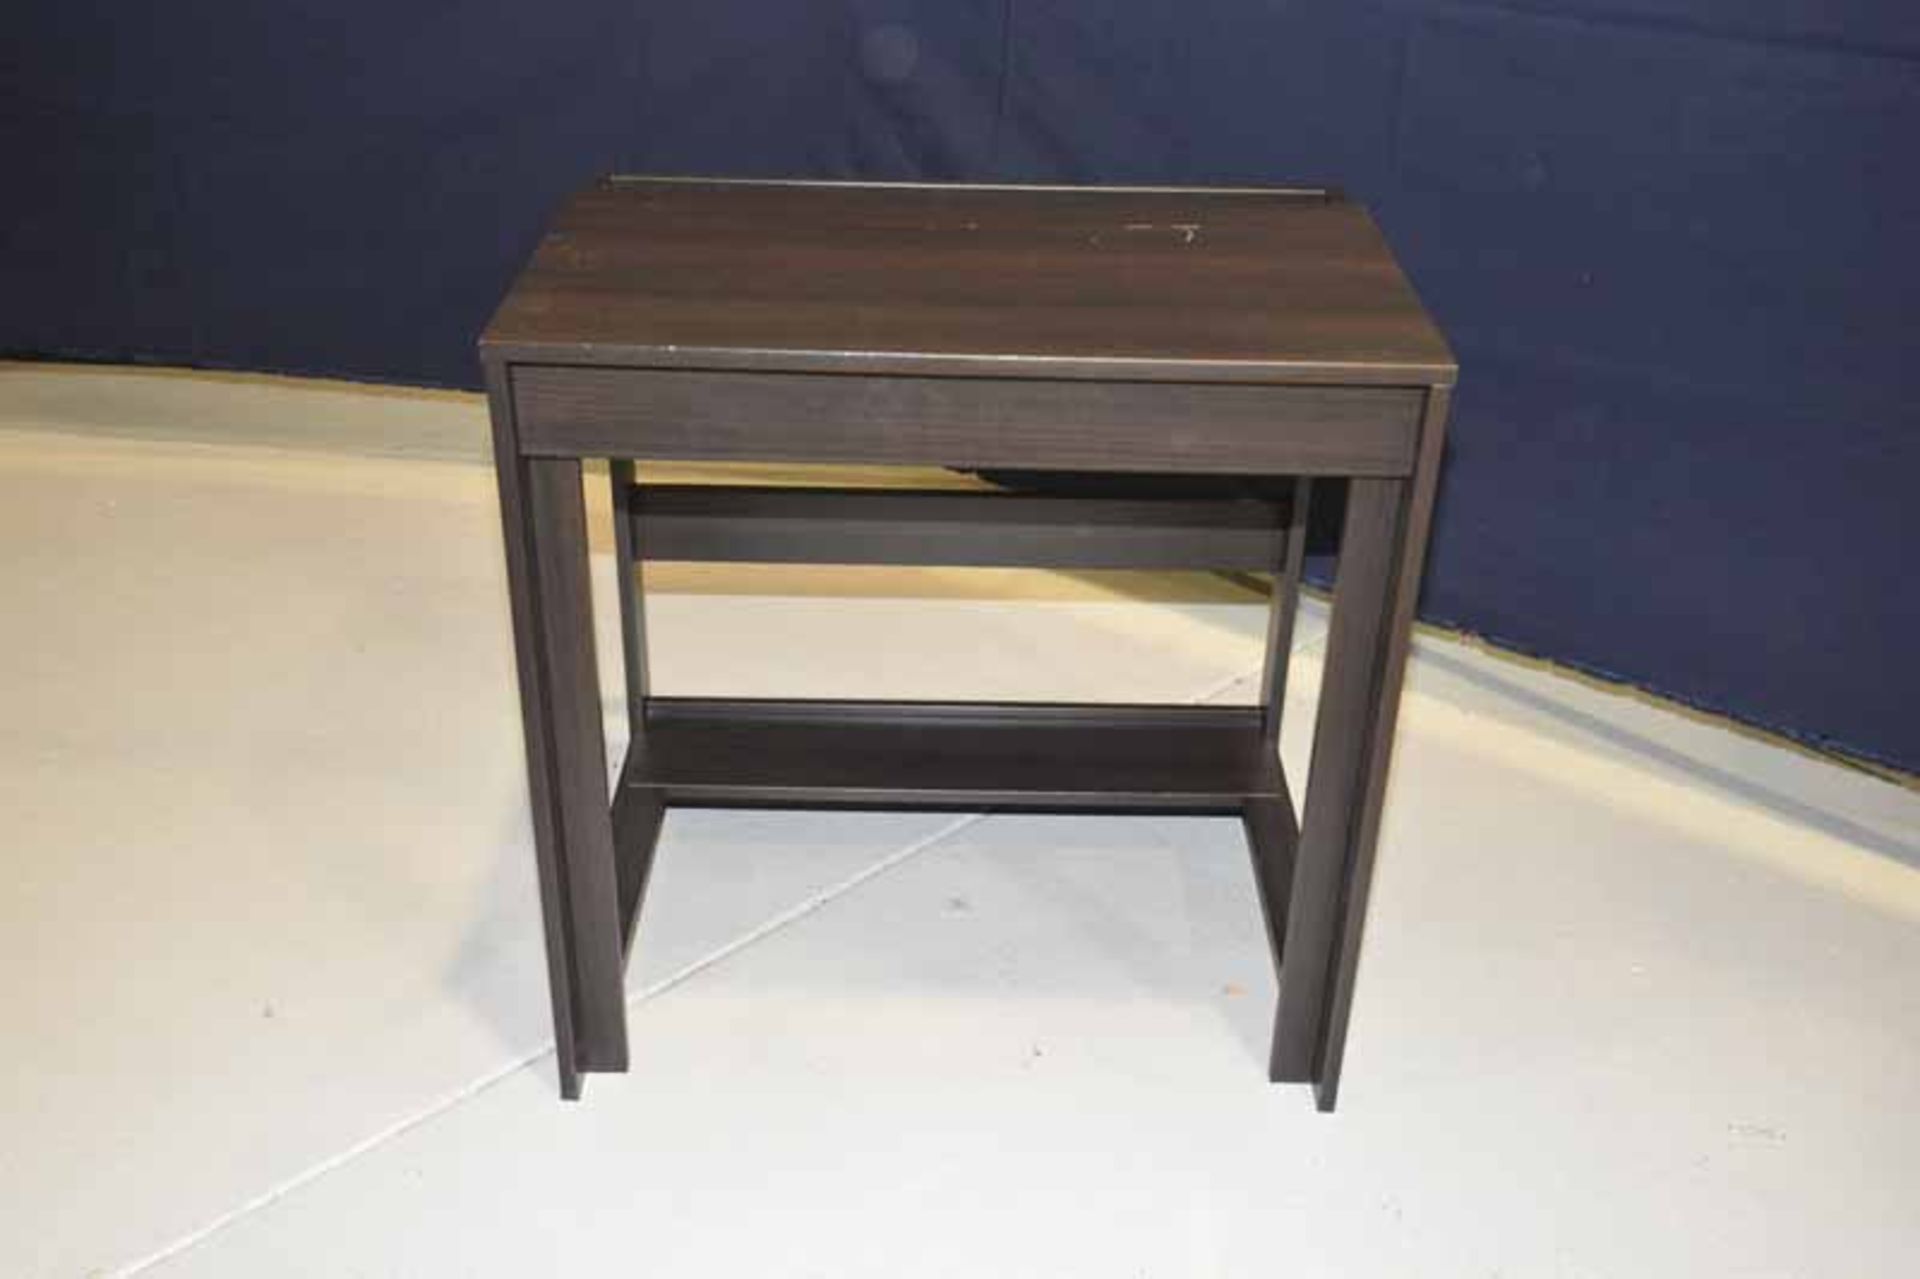 Group of 5 Pieces of Furniture - Image 2 of 5